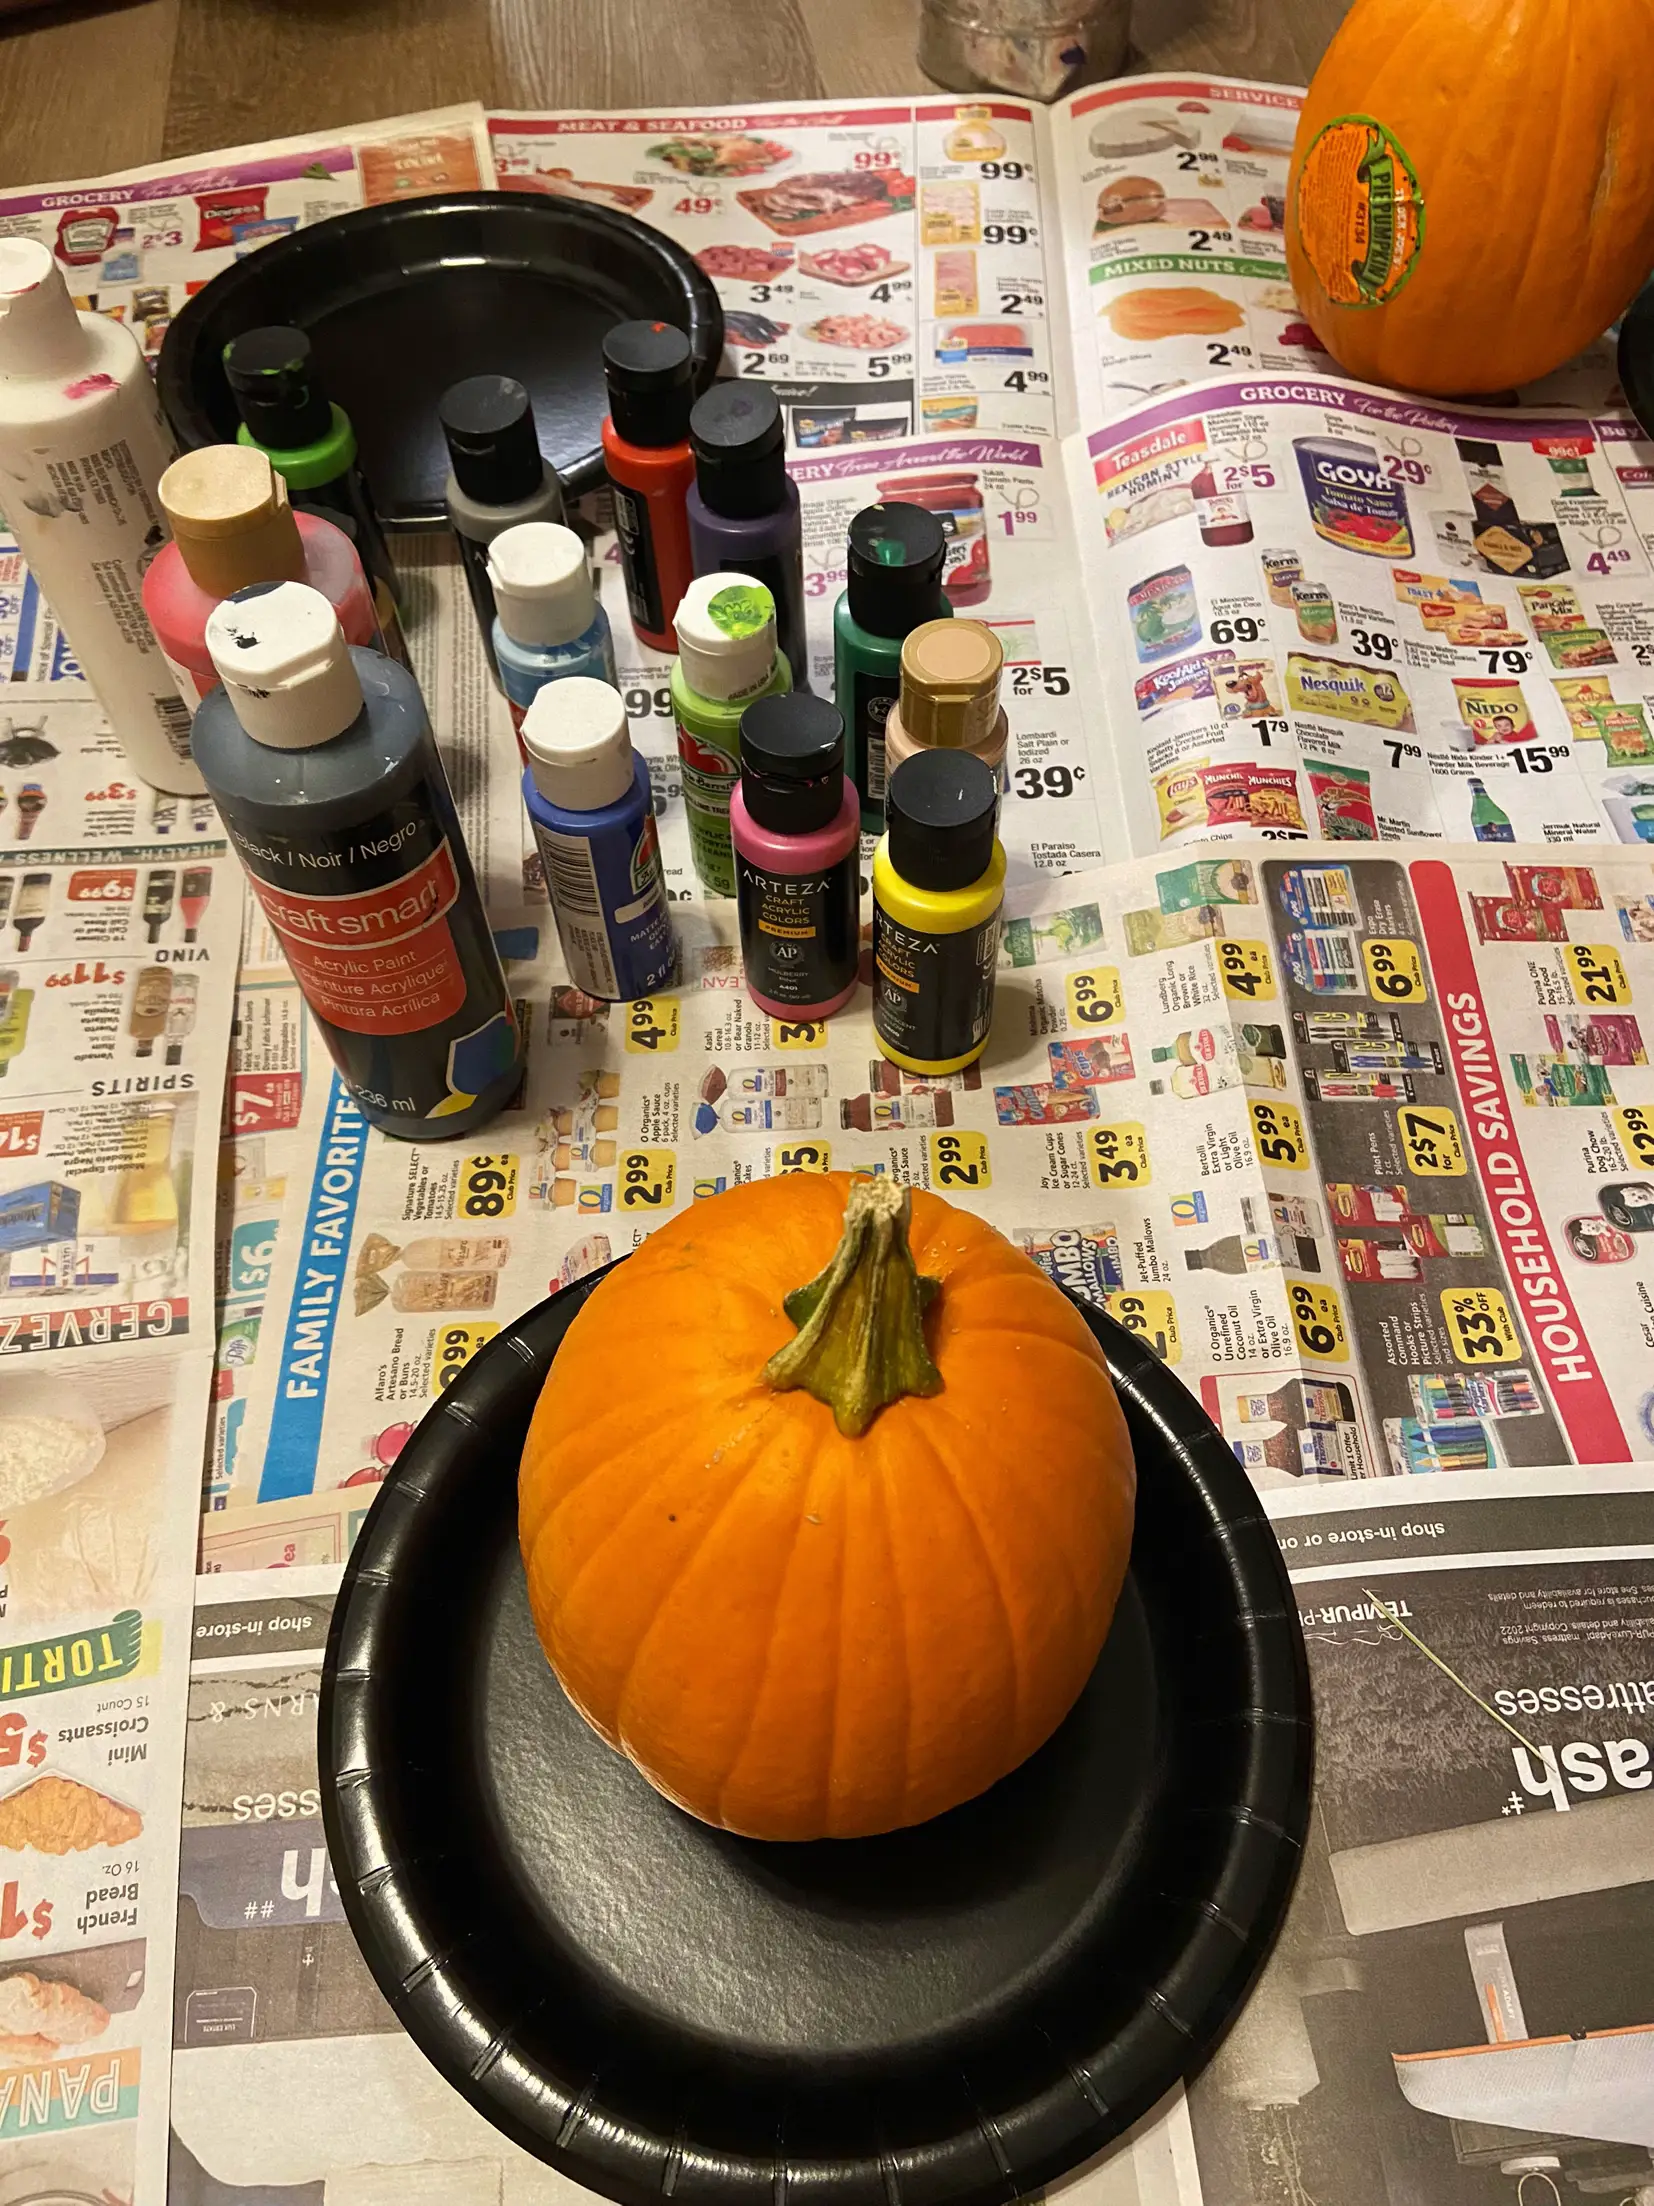 How to host a Pumpkin Painting Party